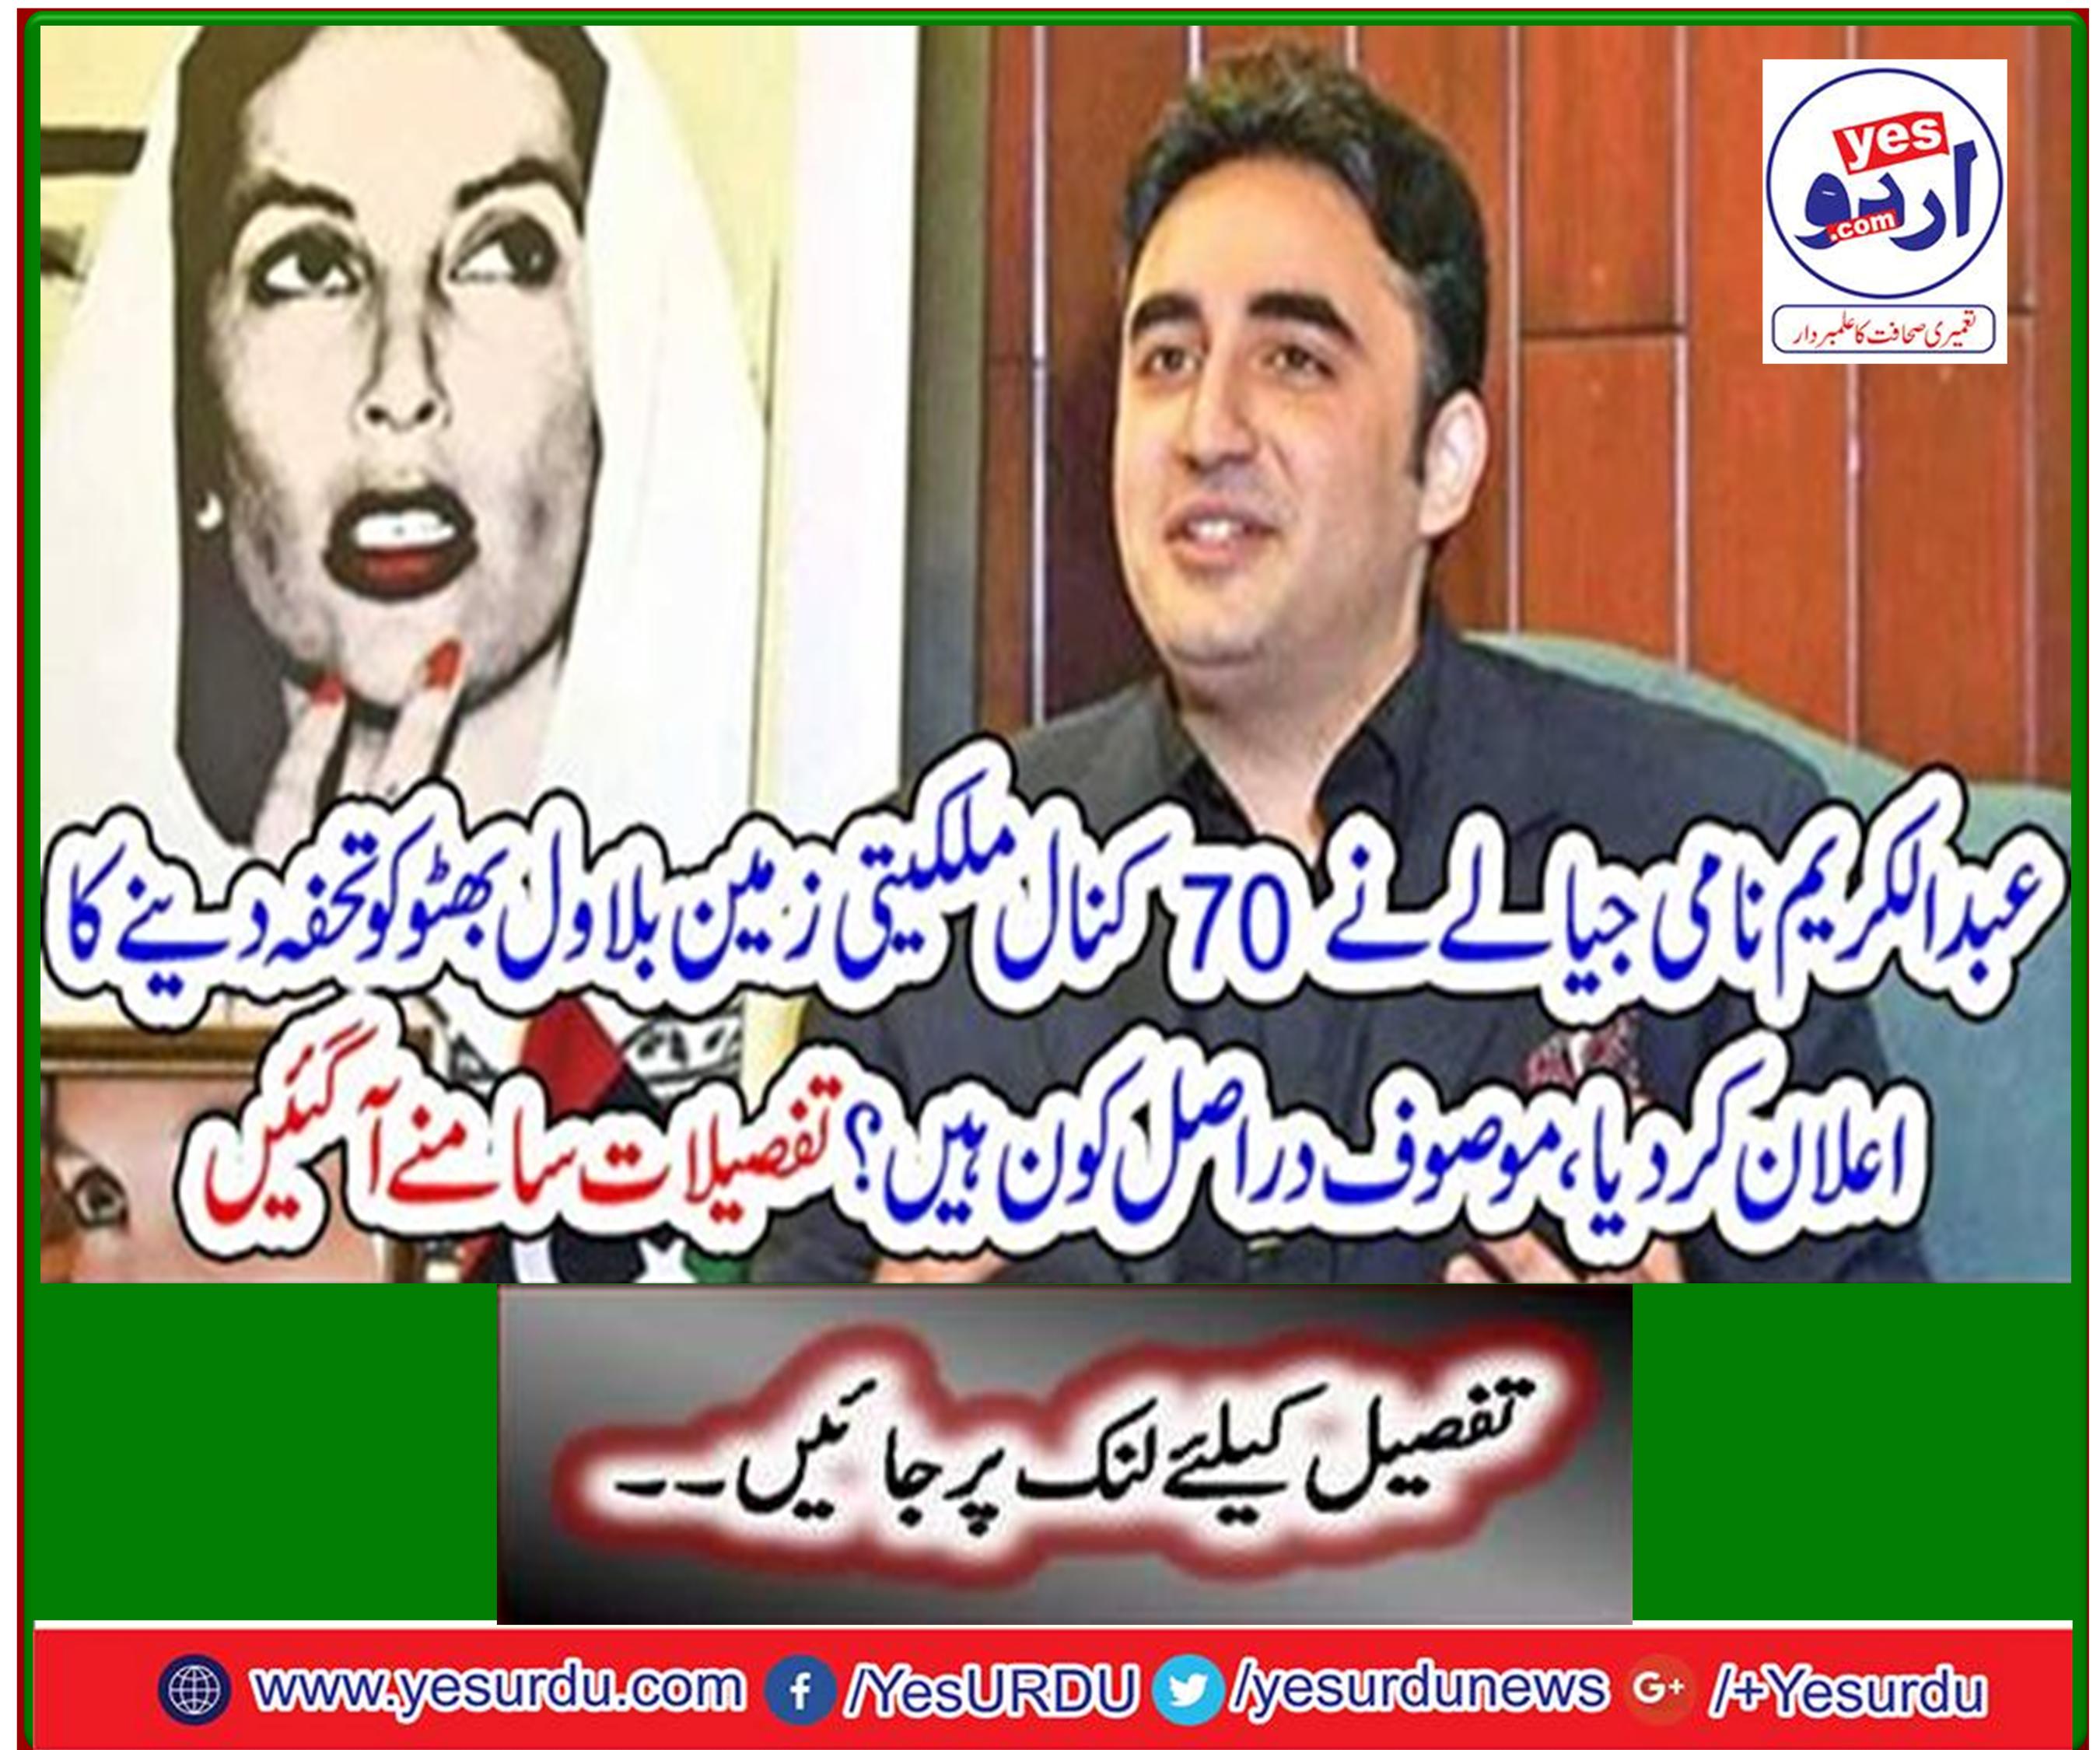 Abdul-Karim Jyala announces a gift of 70 kanal owned land to Bilawal Bhutto, who is the target? Details come out